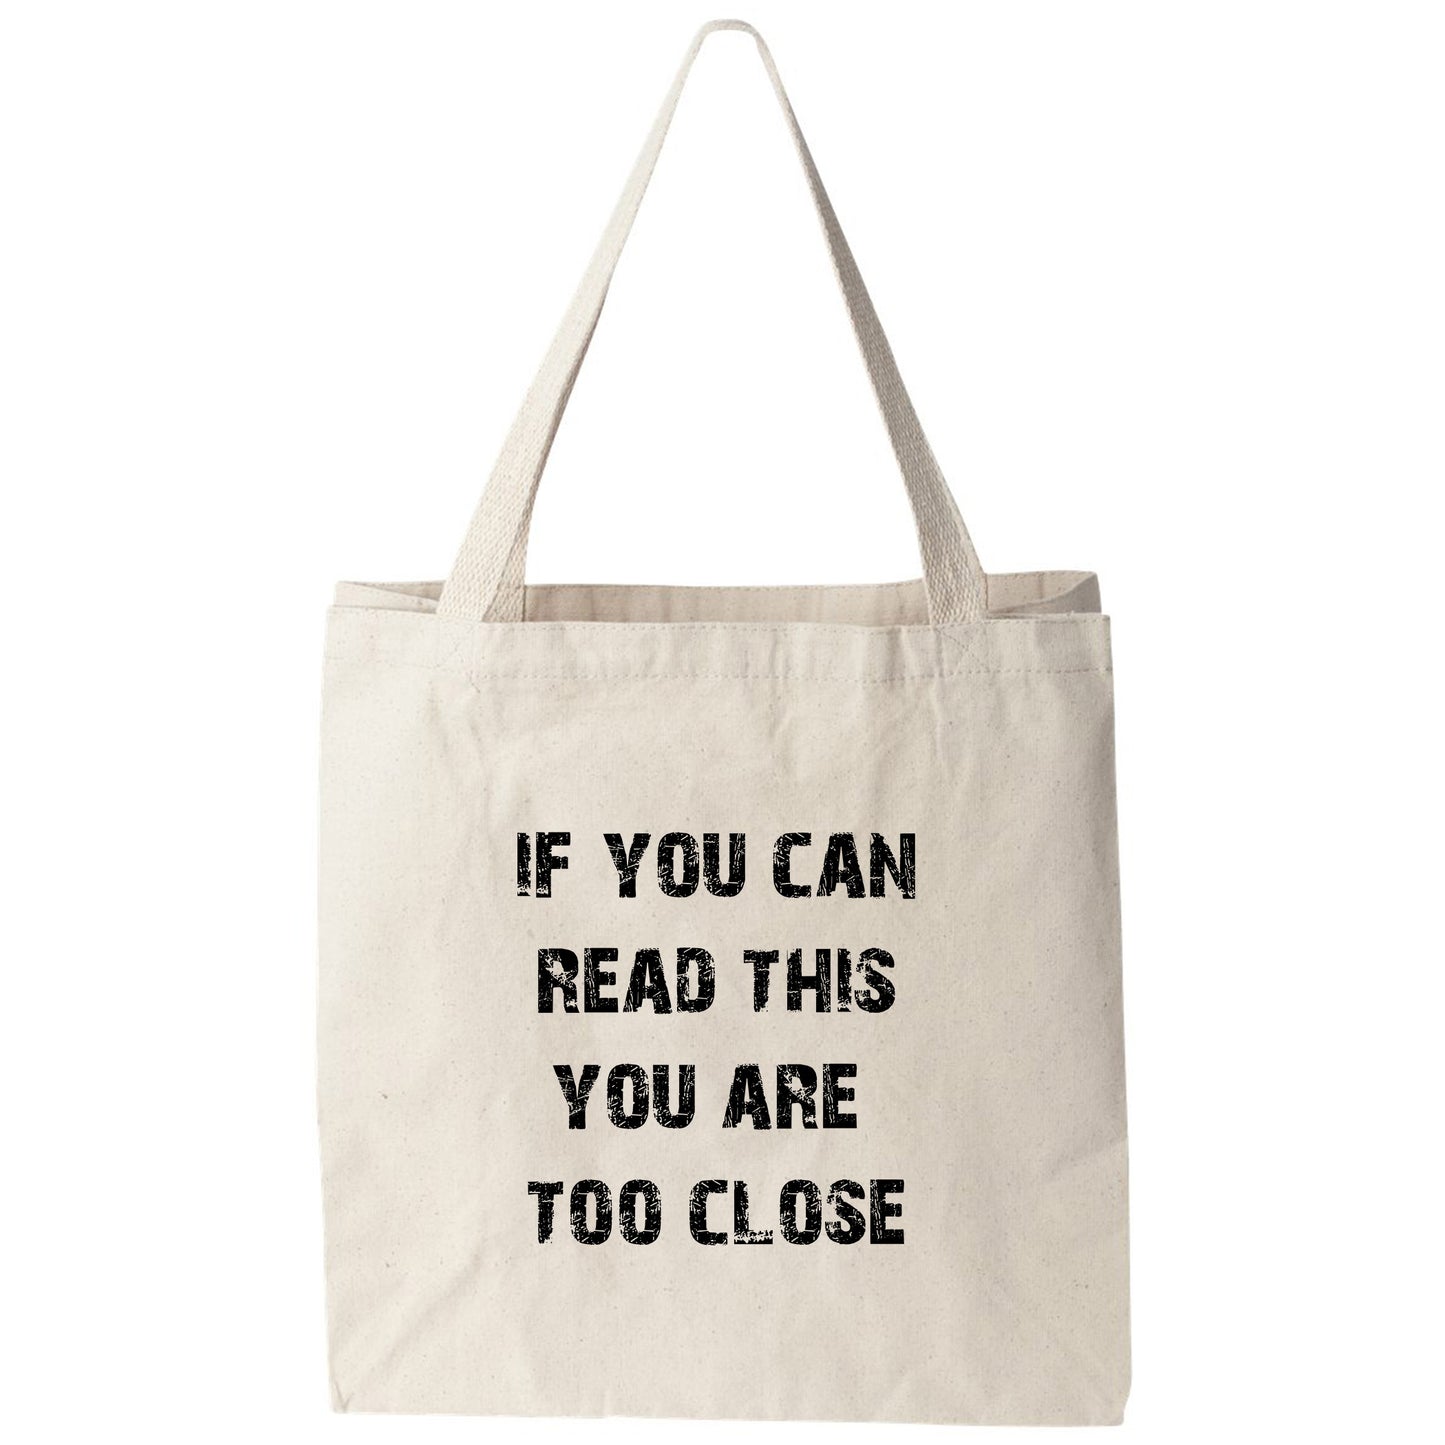 a tote bag that says if you can read this you are too close